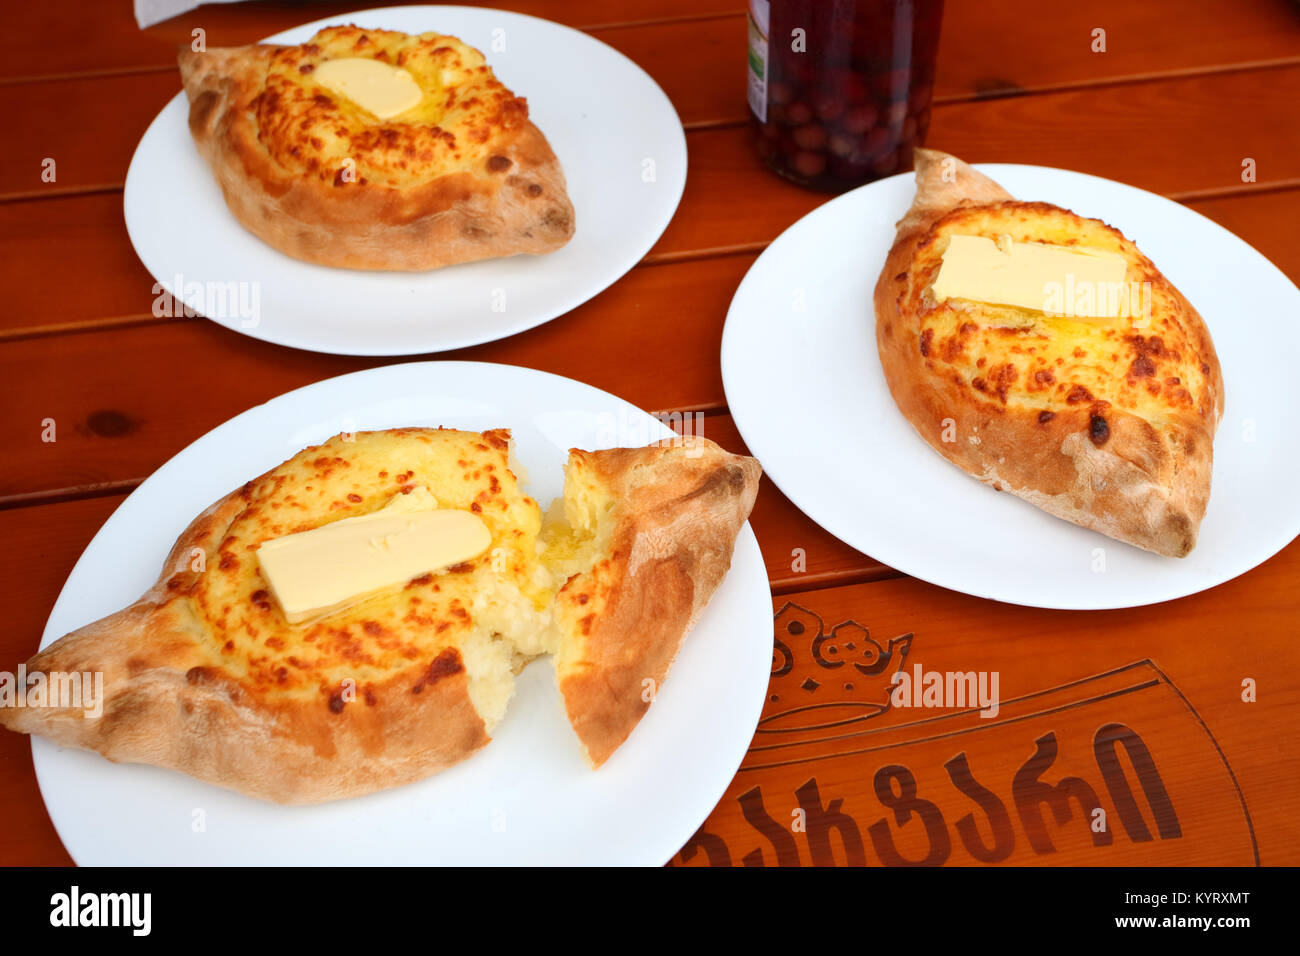 Traditional georgian cuisine: bread with cheese and egg called khachapuri Stock Photo